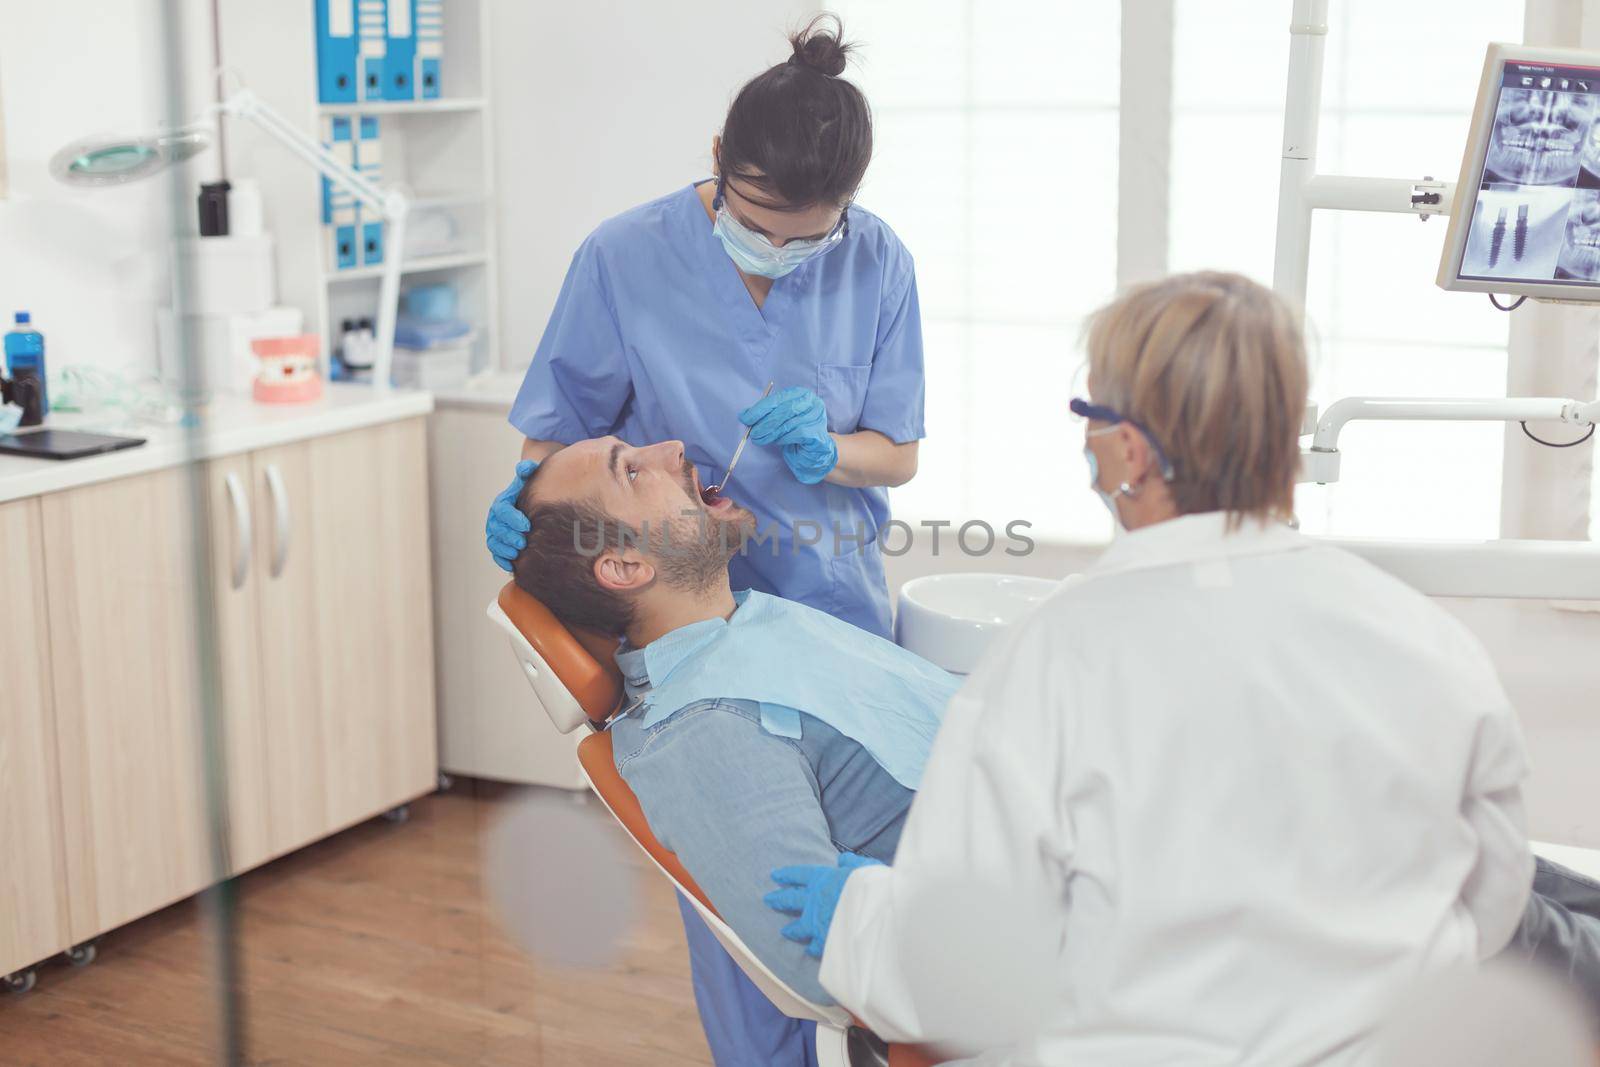 Medical assistant analyzing mouth of sick patient preparing for dental surgery by DCStudio